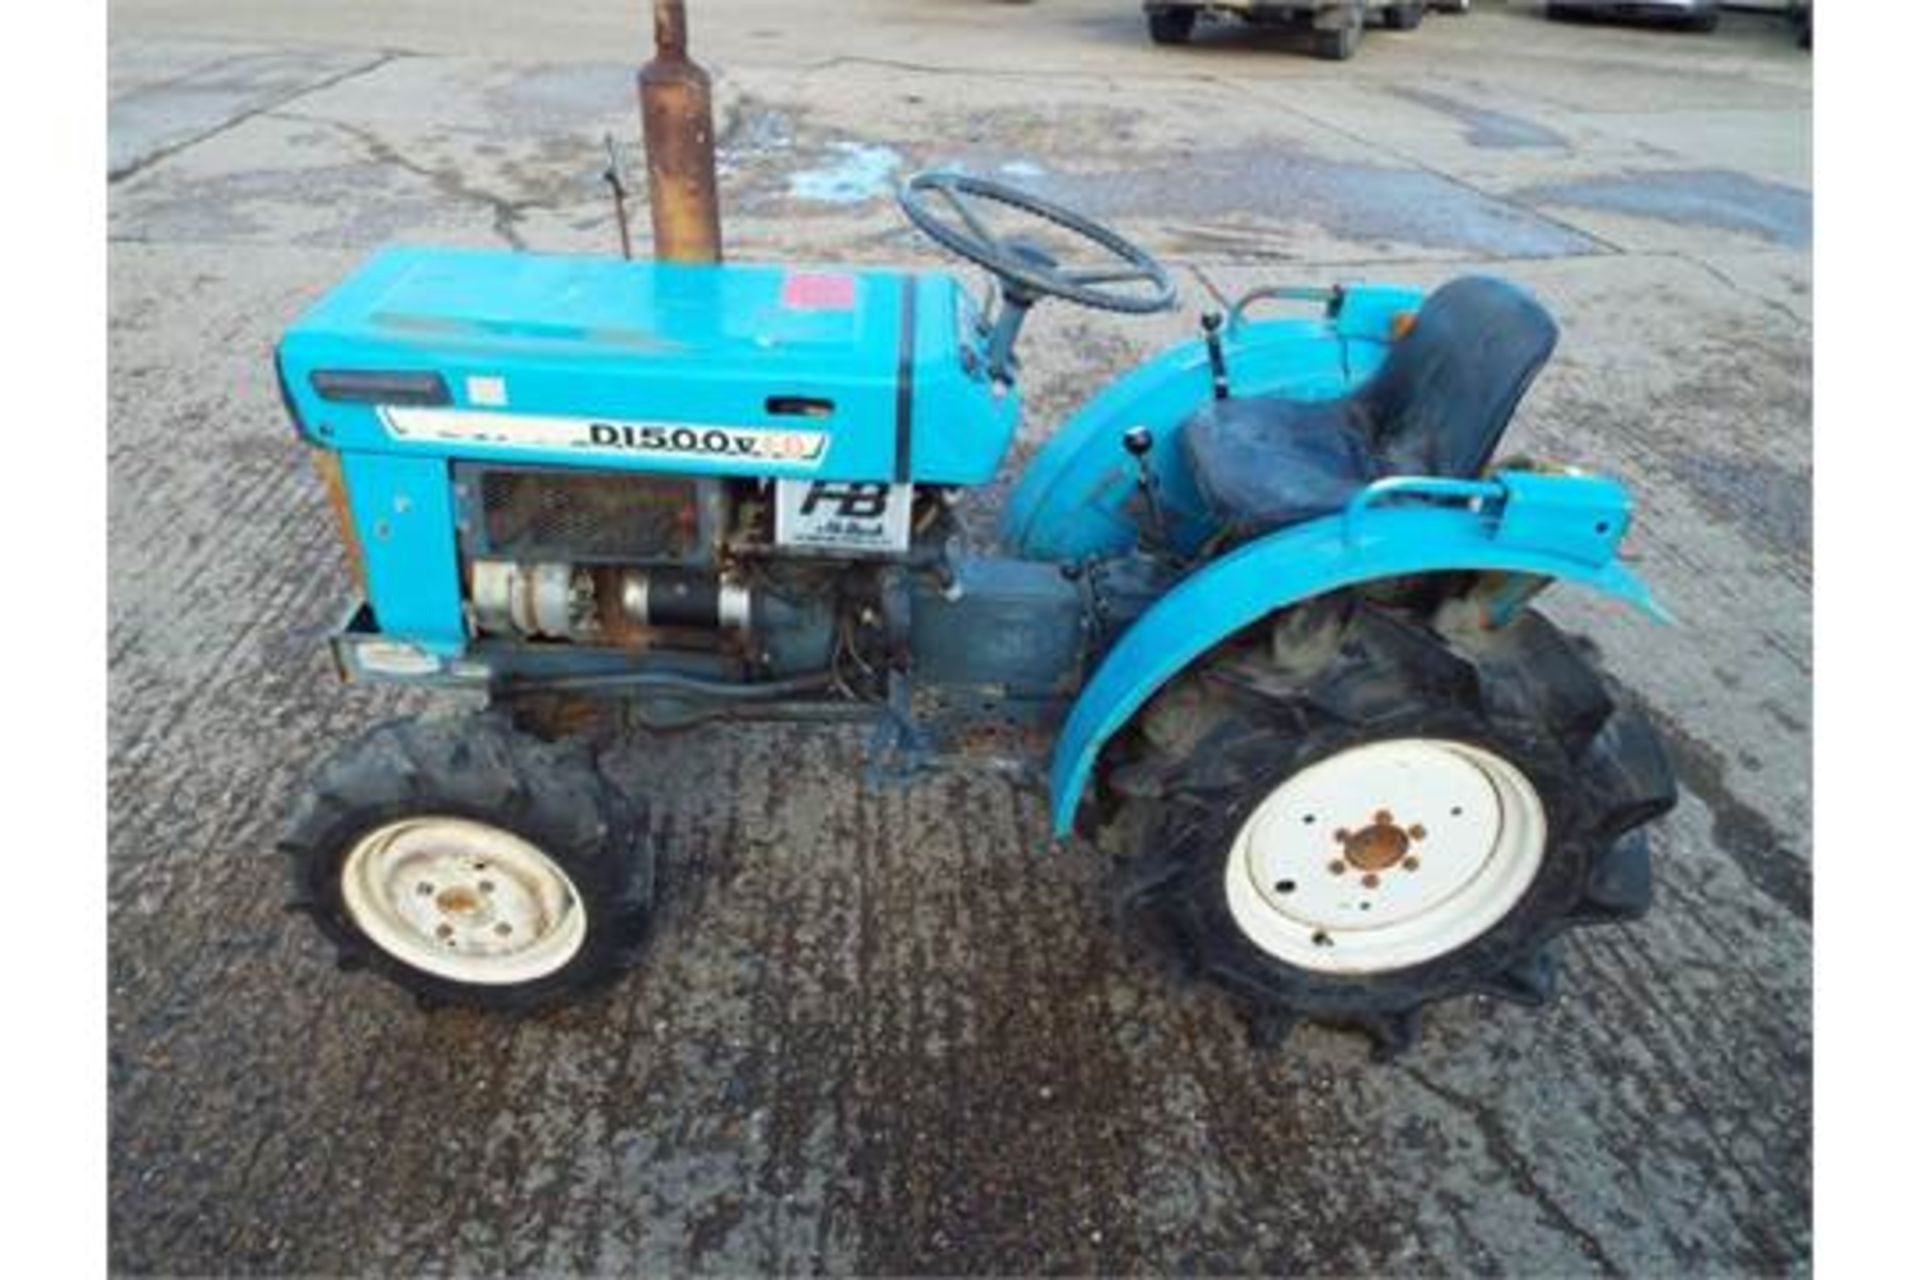 Mitsubishi D1500 4WD Compact Tractor - Image 3 of 15